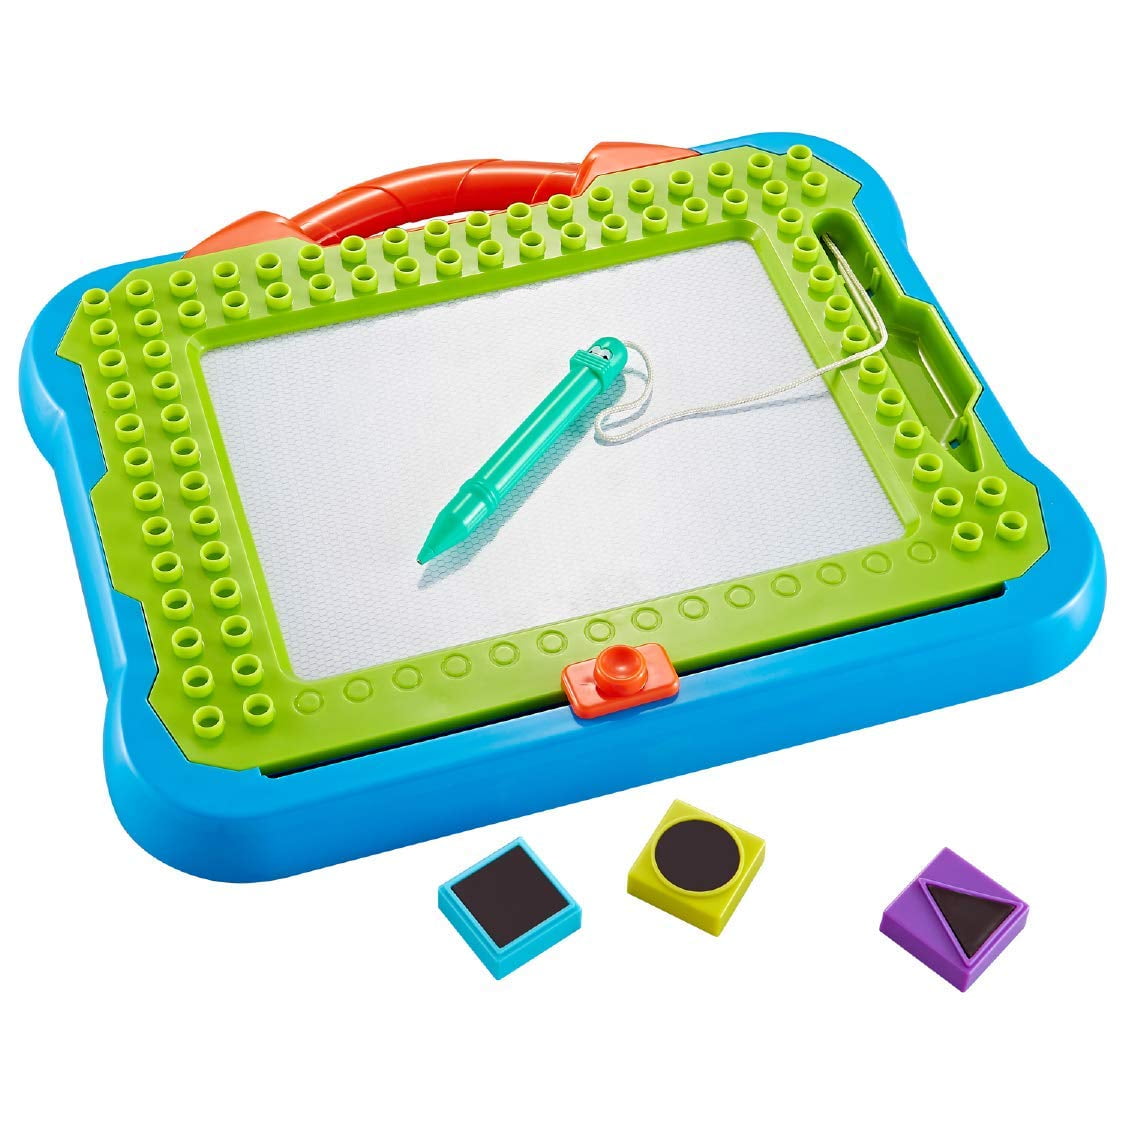 Think Gizmos Magnetic Writing Board / Sketch - Fun Toy for Boys and Girls Aged 3 4 5 6 7 8 - Magnetic Board Learning Resource for Children - TG810 - Walmart.com